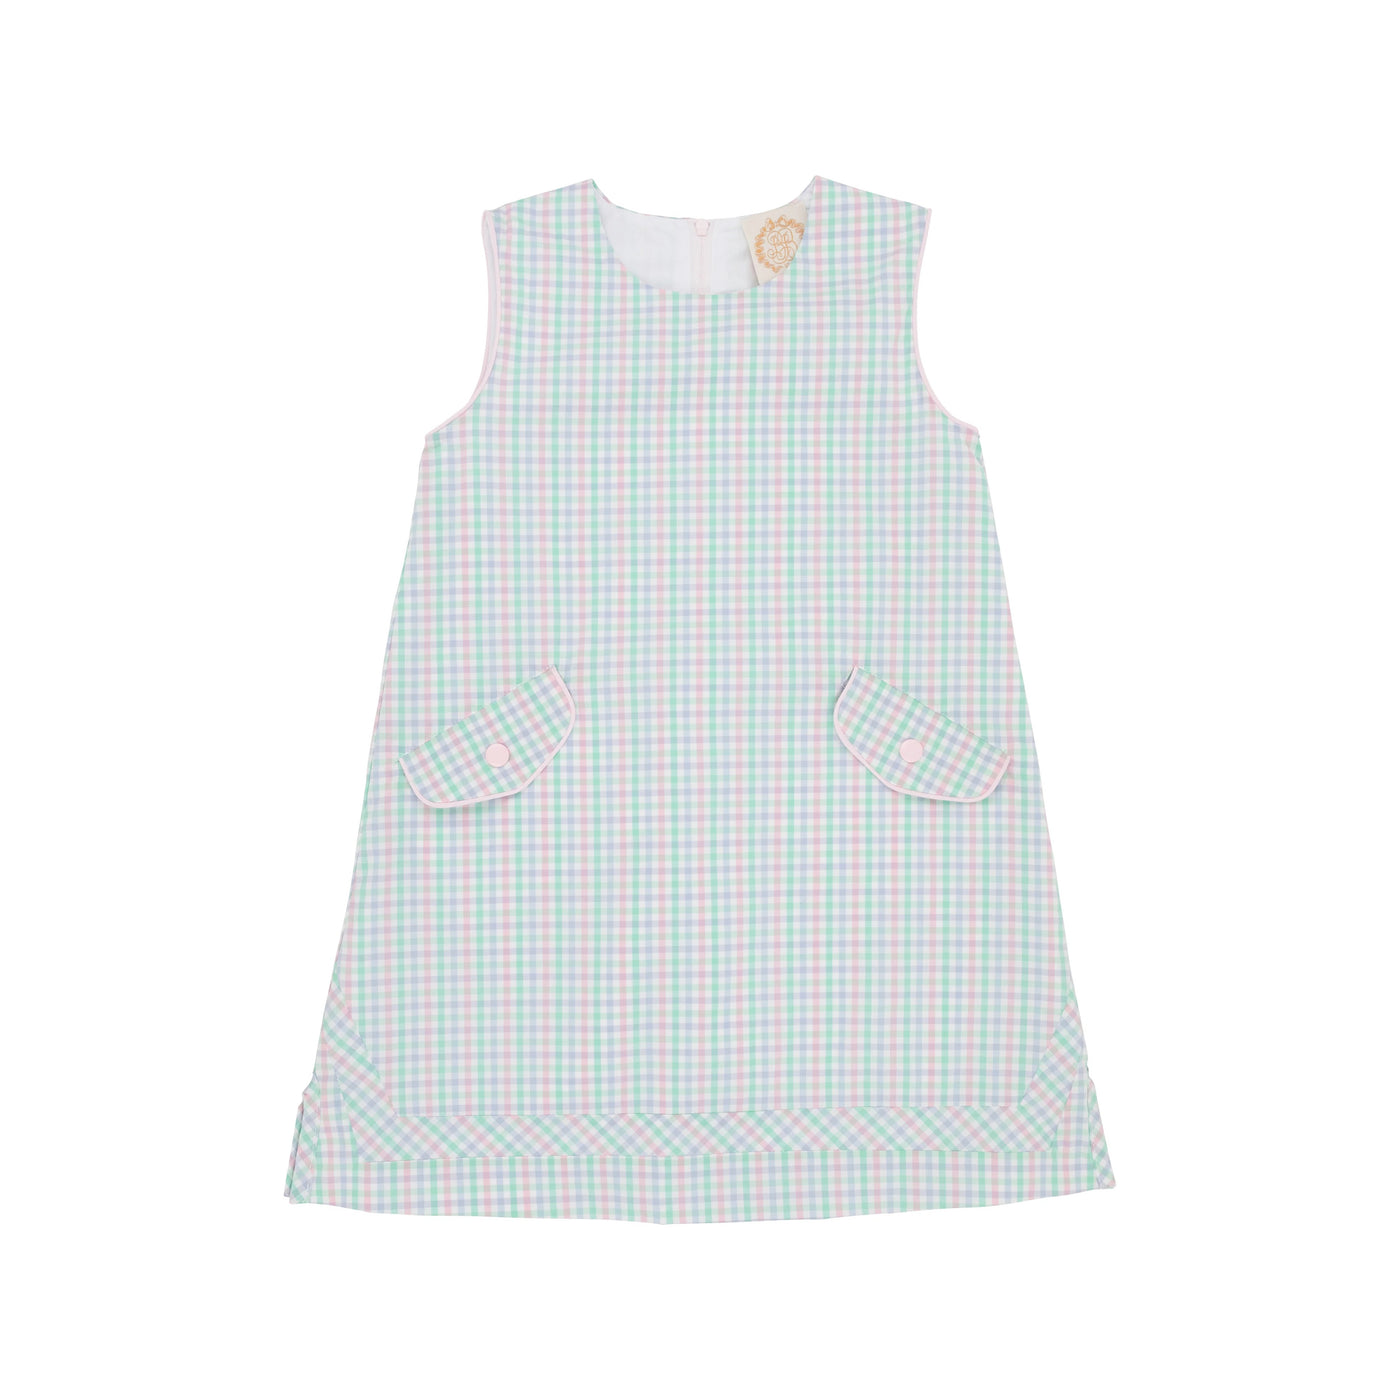 Taylor Tunic Dress - Sir Proper's Preppy Plaid With Palm Beach Pink